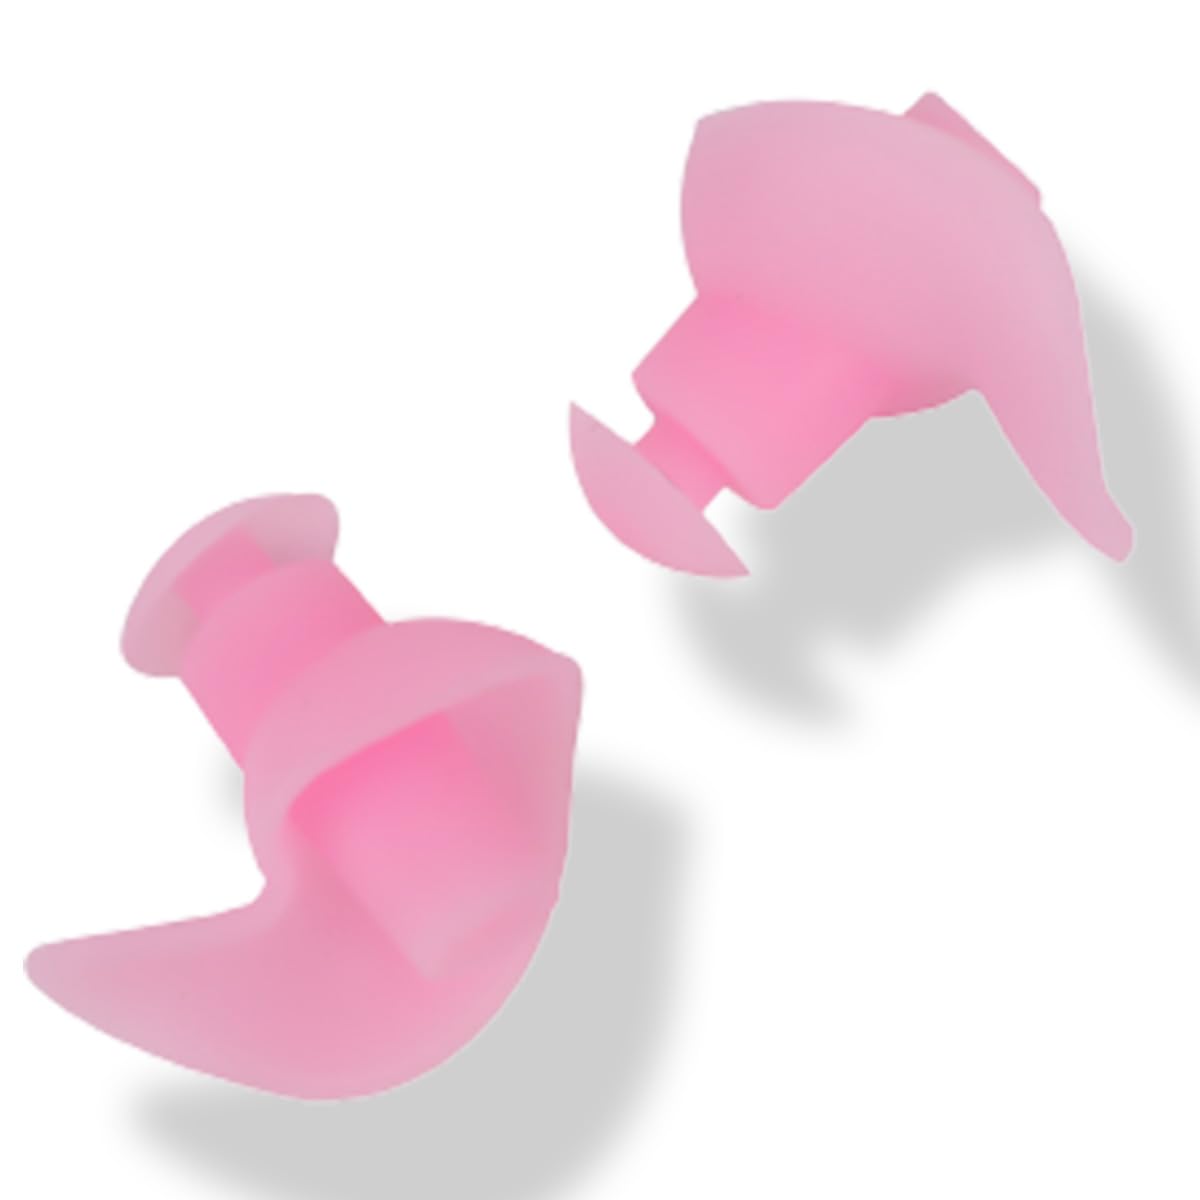 Strauss Swimming Earplugs | Waterproof and Reusable Silicone Swimming Ear Plugs|Noise Cancellation, Soundproof Earplug Can Be Used For Swimming,Flight Travel and| Suitable for Kids and Adults,(Pink)